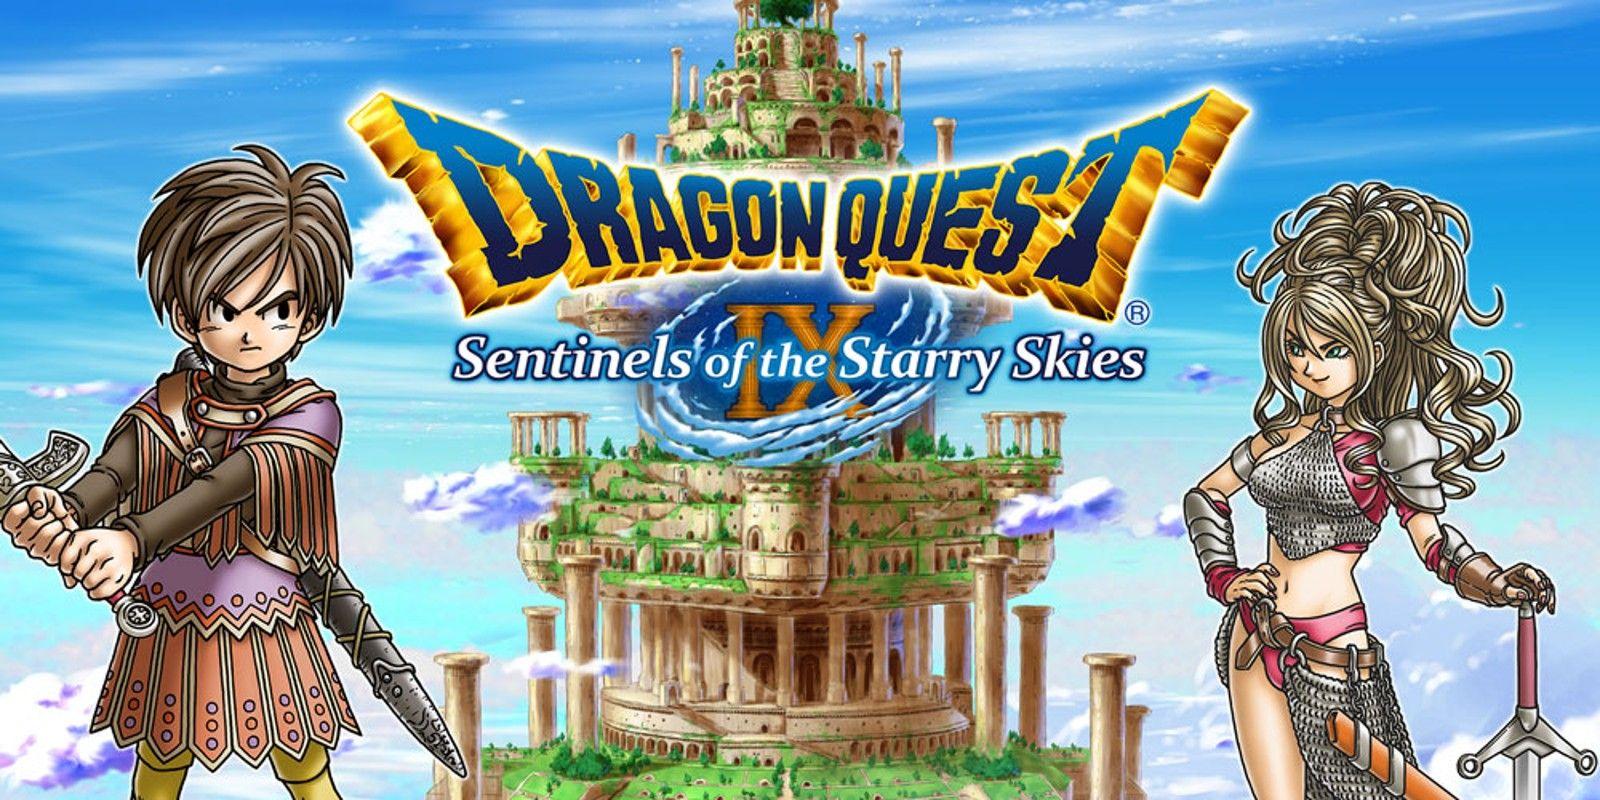 Dragon Quest 9 Wallpapers Top Free Dragon Quest 9 Backgrounds Wallpaperaccess